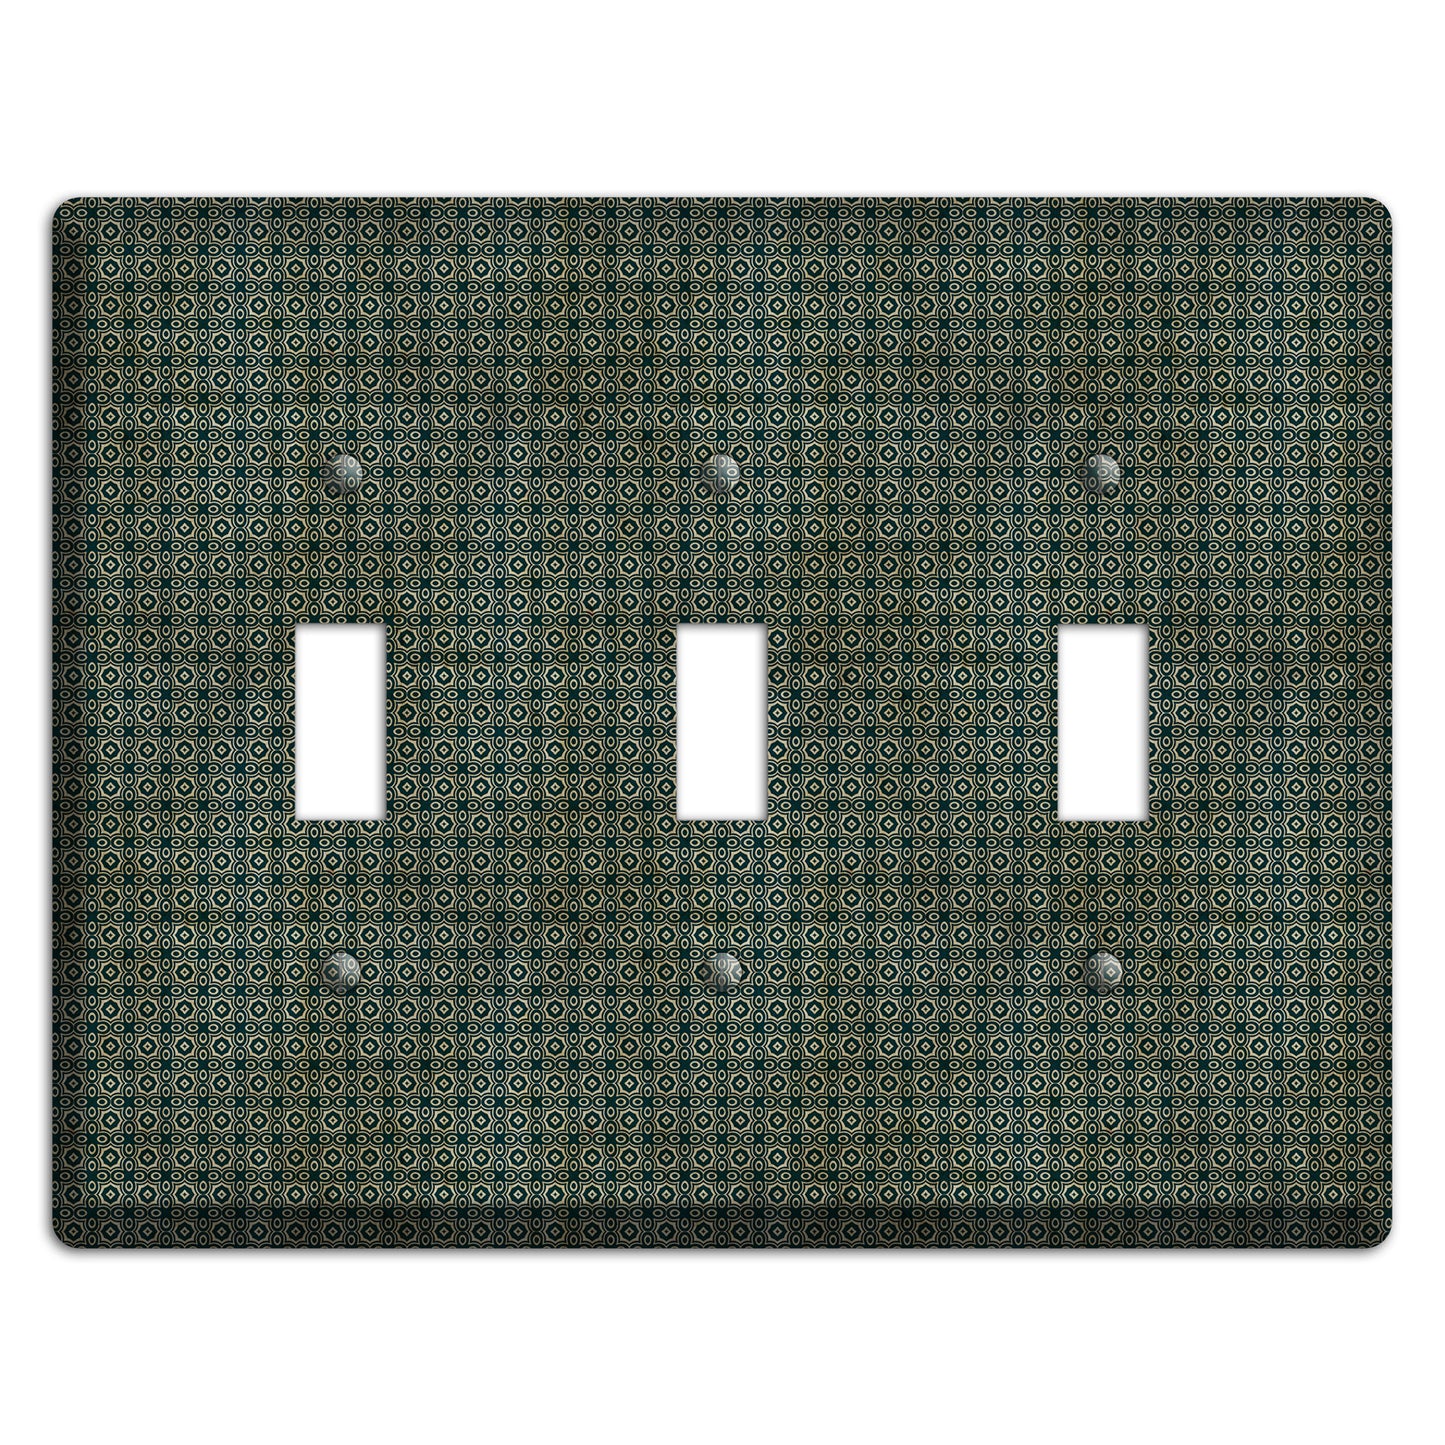 Dark Green Grunge Tiny Tiled Tapestry 3 Toggle Wallplate